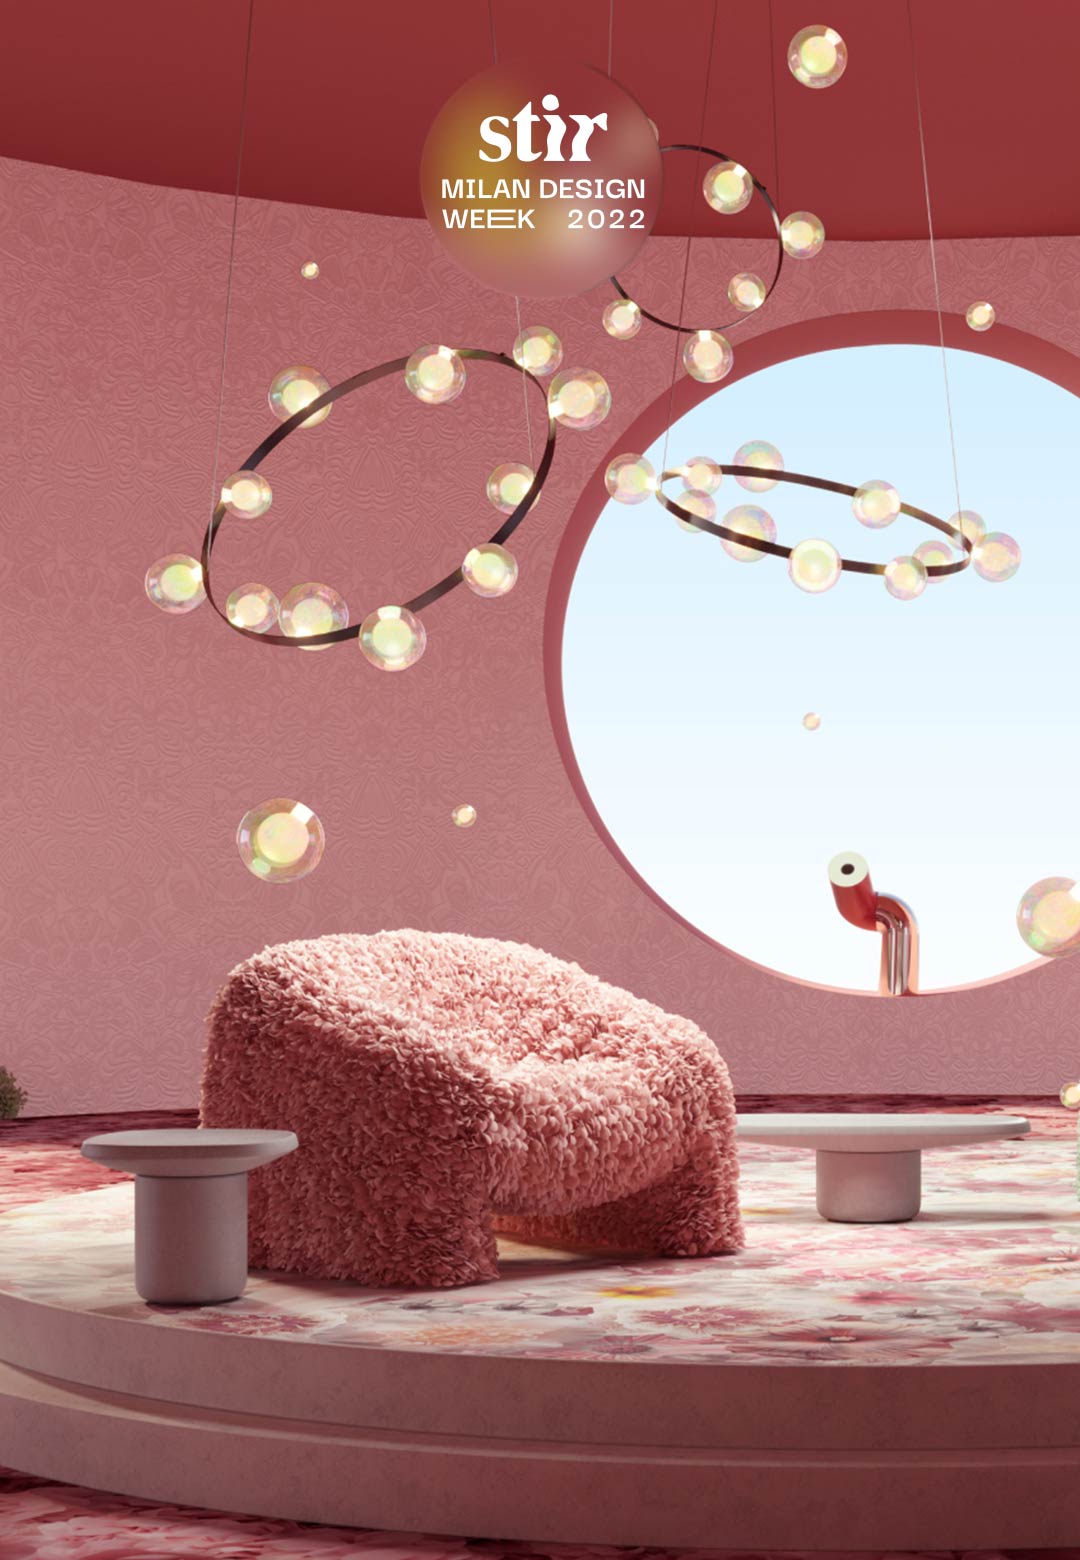 ‘A Life Extraordinary’ by Moooi blurs the physical and digital at Salone 2022